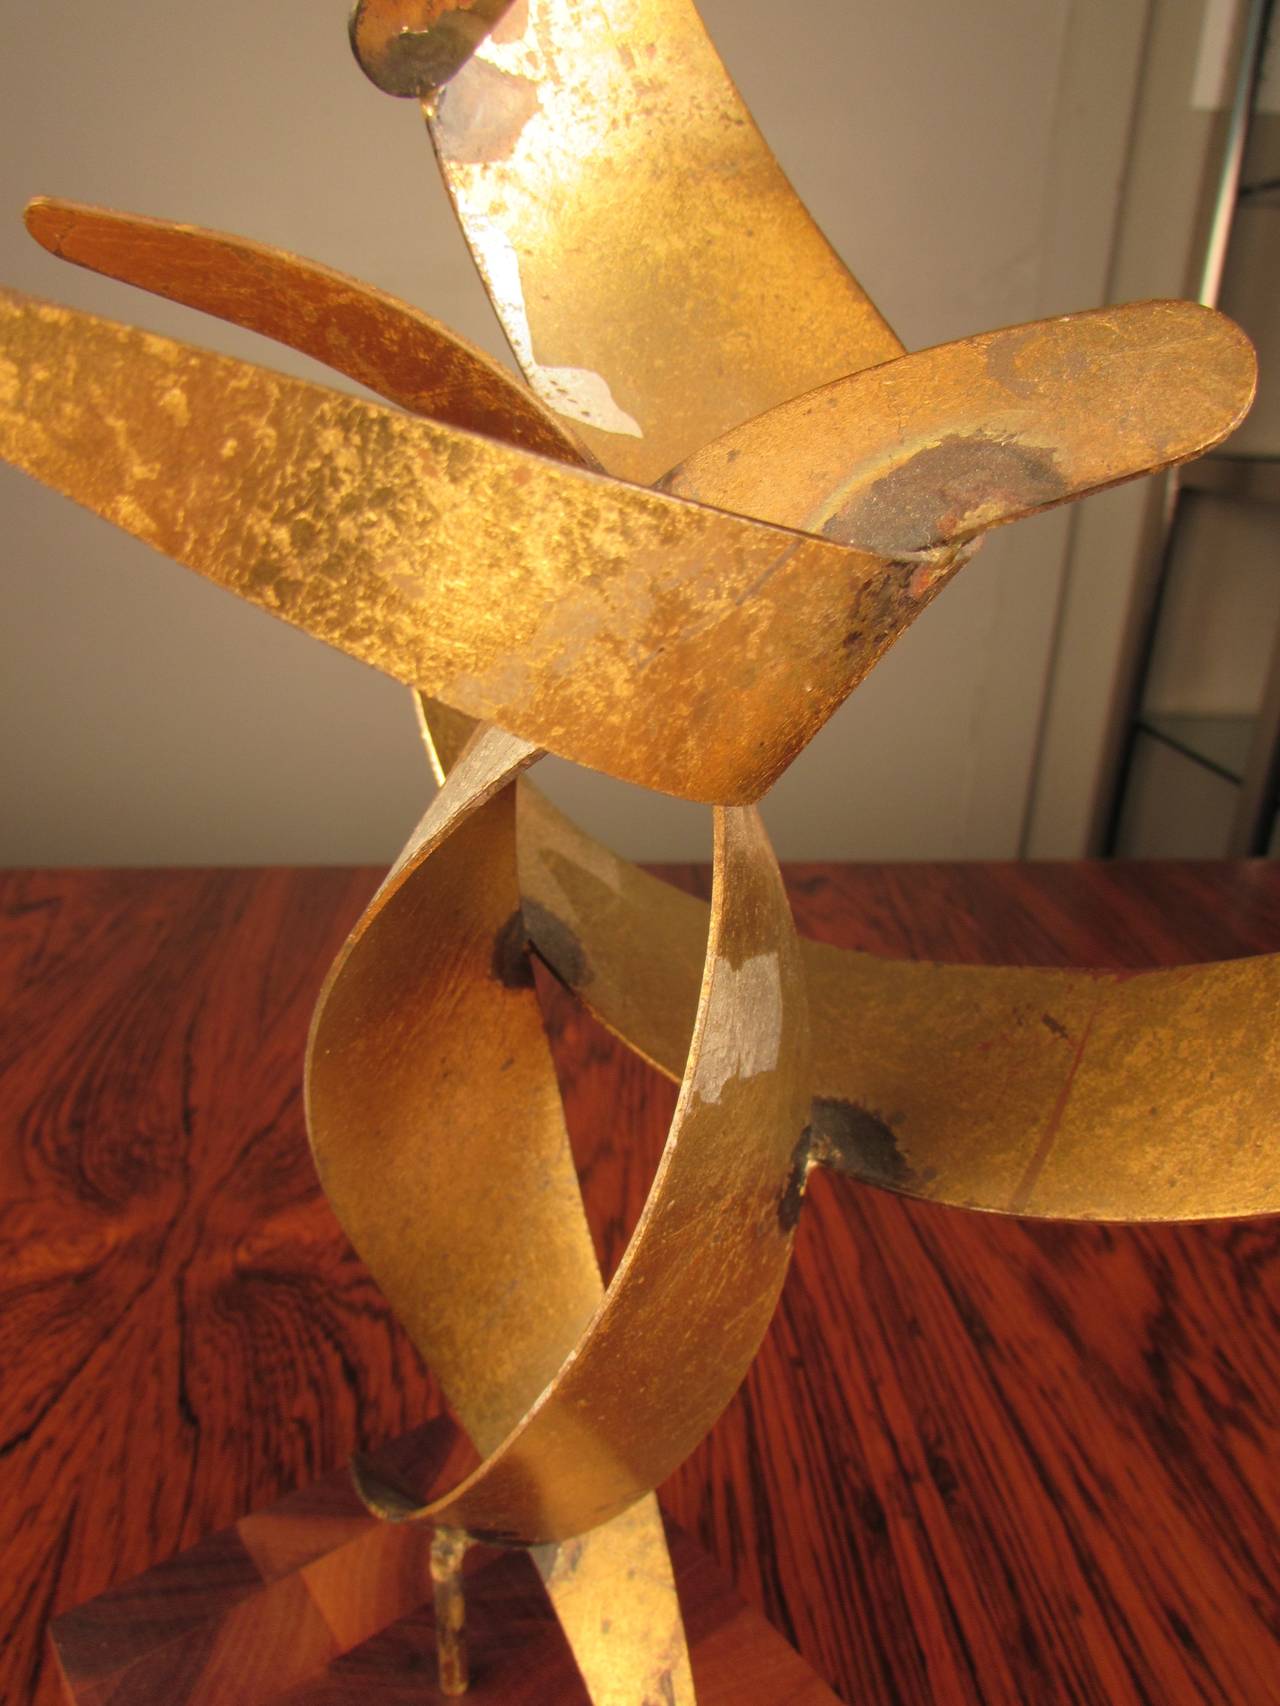 Cut Steel Rare Gilded William Bowie Table Sculpture on Staved Teak Base, Signed